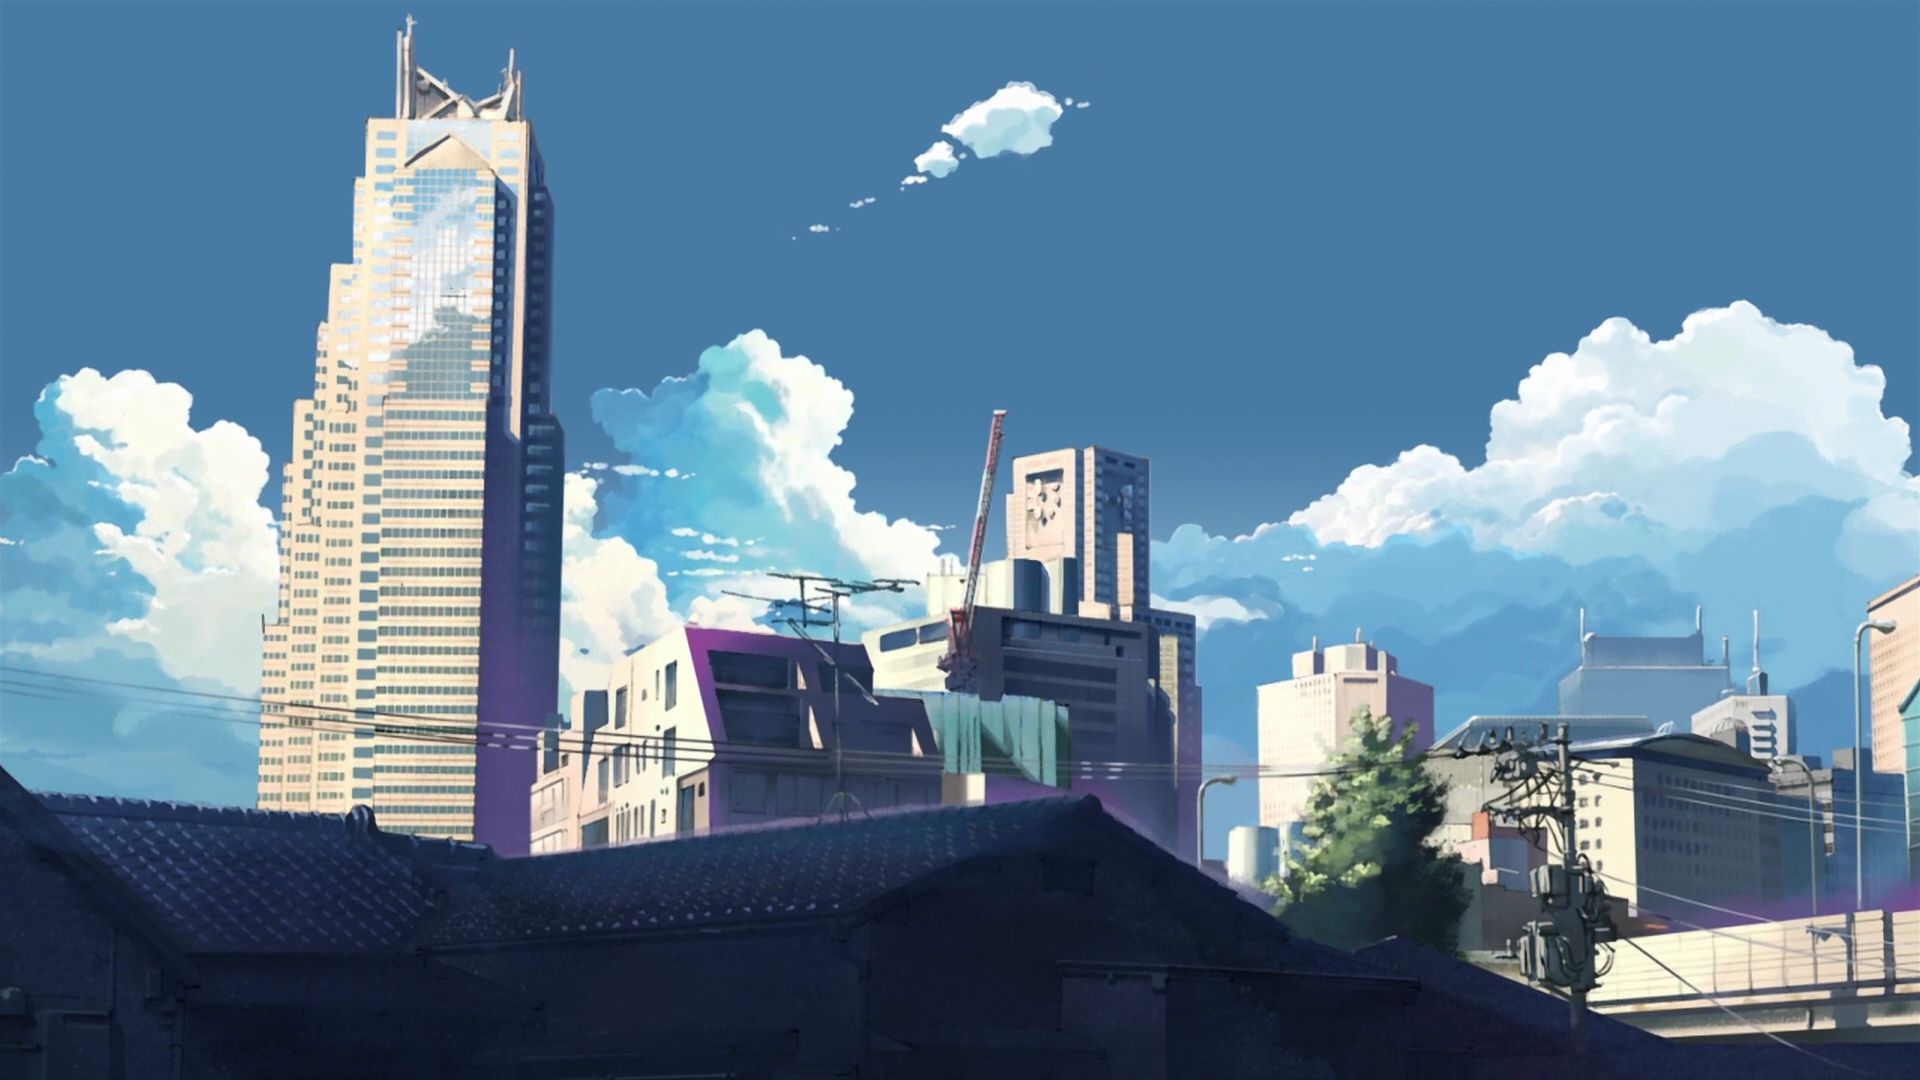 Download Free 100 + aesthetic anime city background